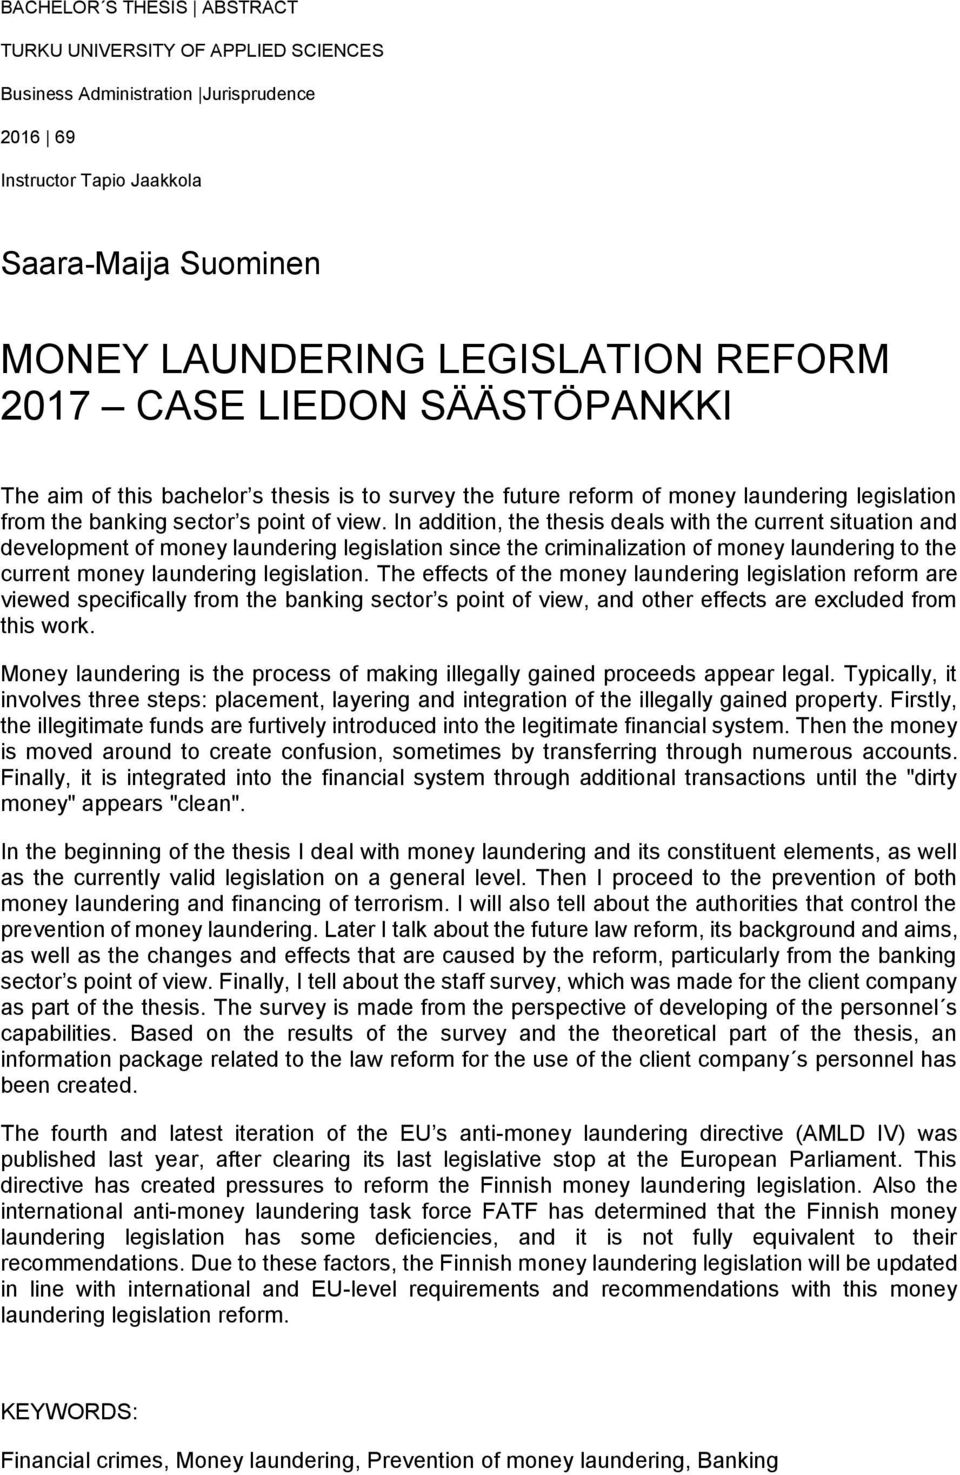 In addition, the thesis deals with the current situation and development of money laundering legislation since the criminalization of money laundering to the current money laundering legislation.